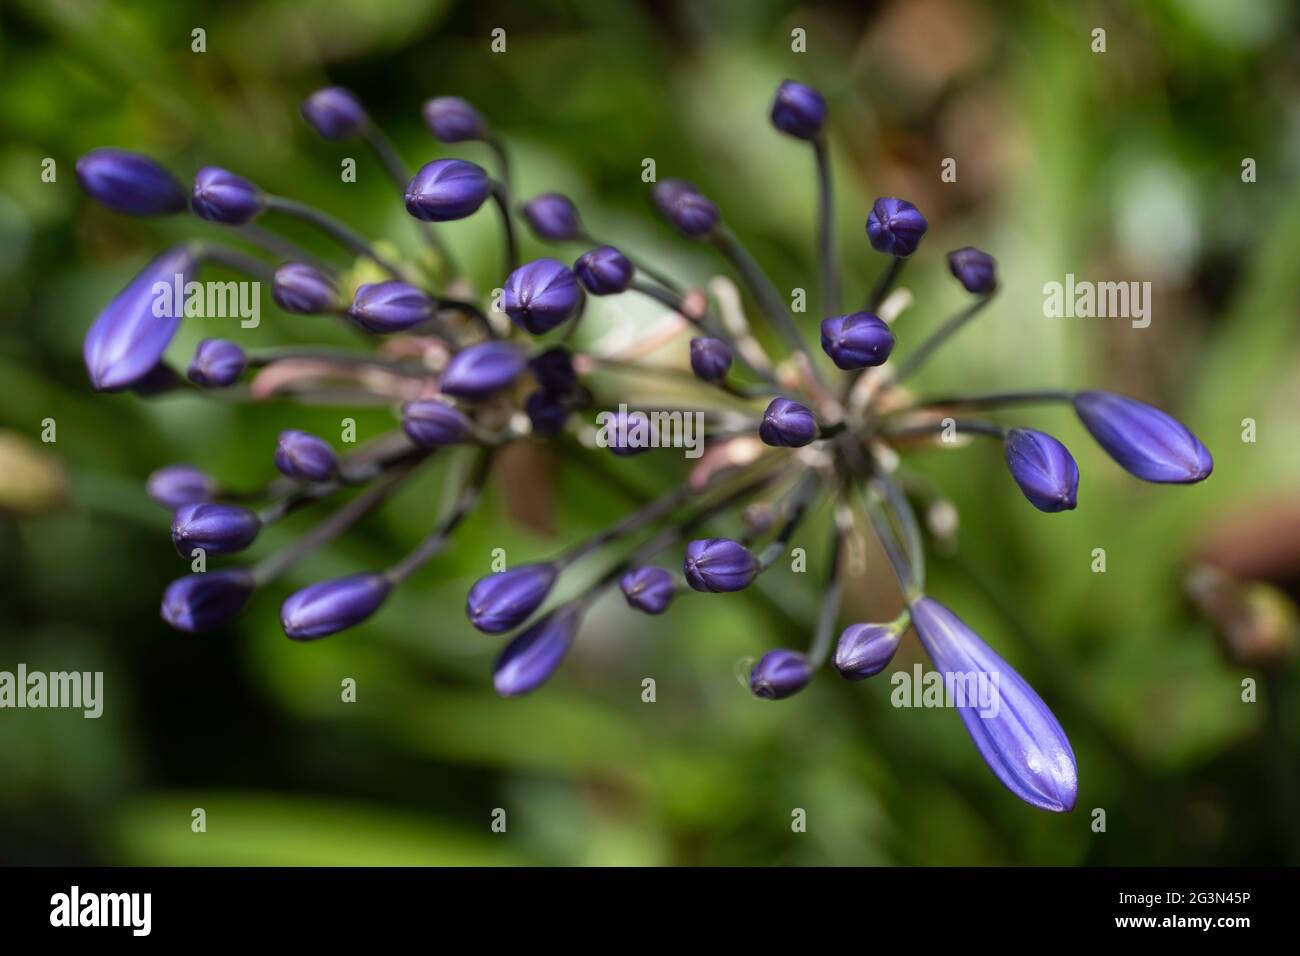 Buds of the violet Agapanthus africanus flower commonly known as lily of the Nile. Seen from above, swallow depth of field, green blurred background Stock Photo